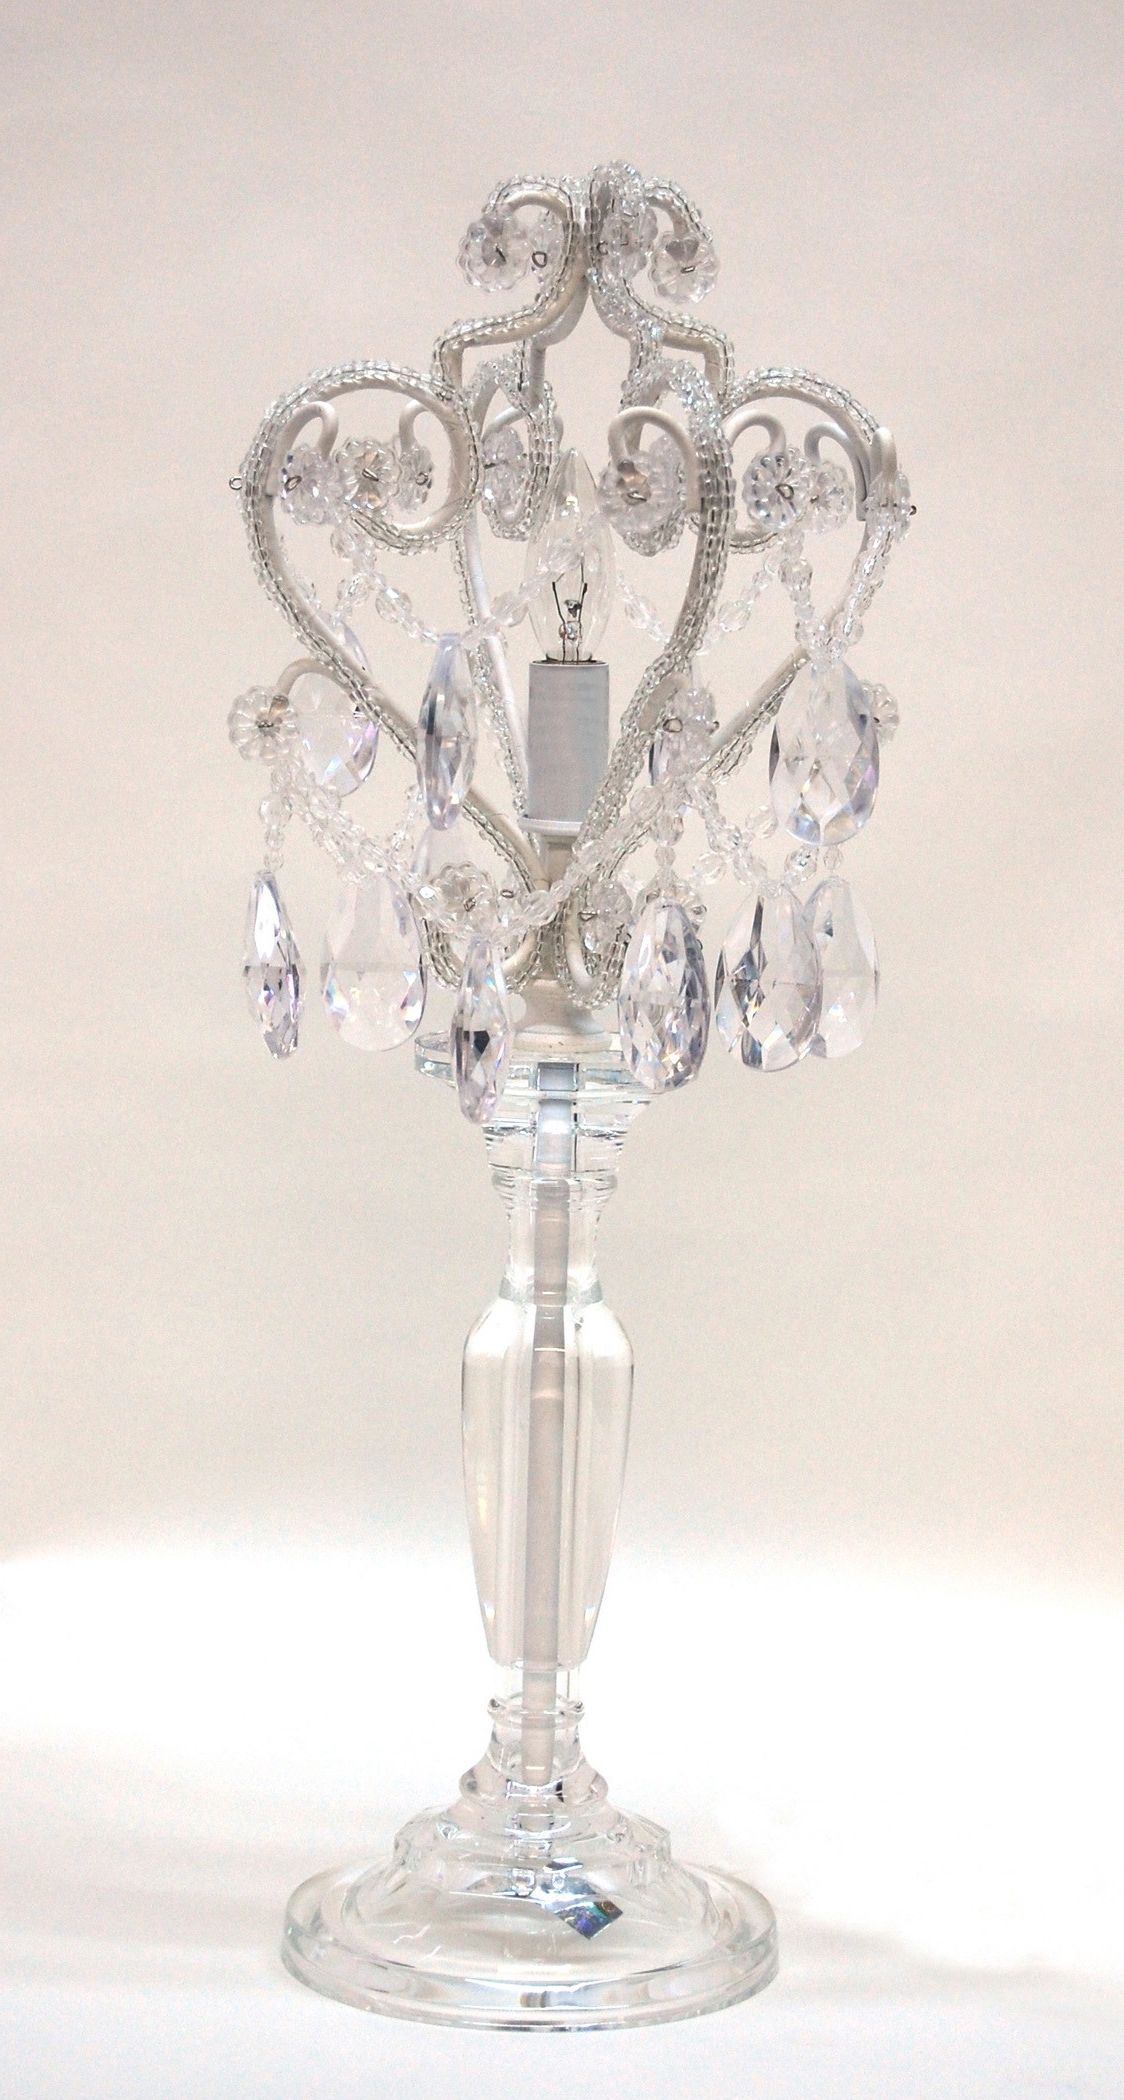 Most Recent Small Crystal Chandelier Table Lamps In Chandeliers : Small Crystal Chandelier New Nightstands Crystal Glass (View 9 of 15)